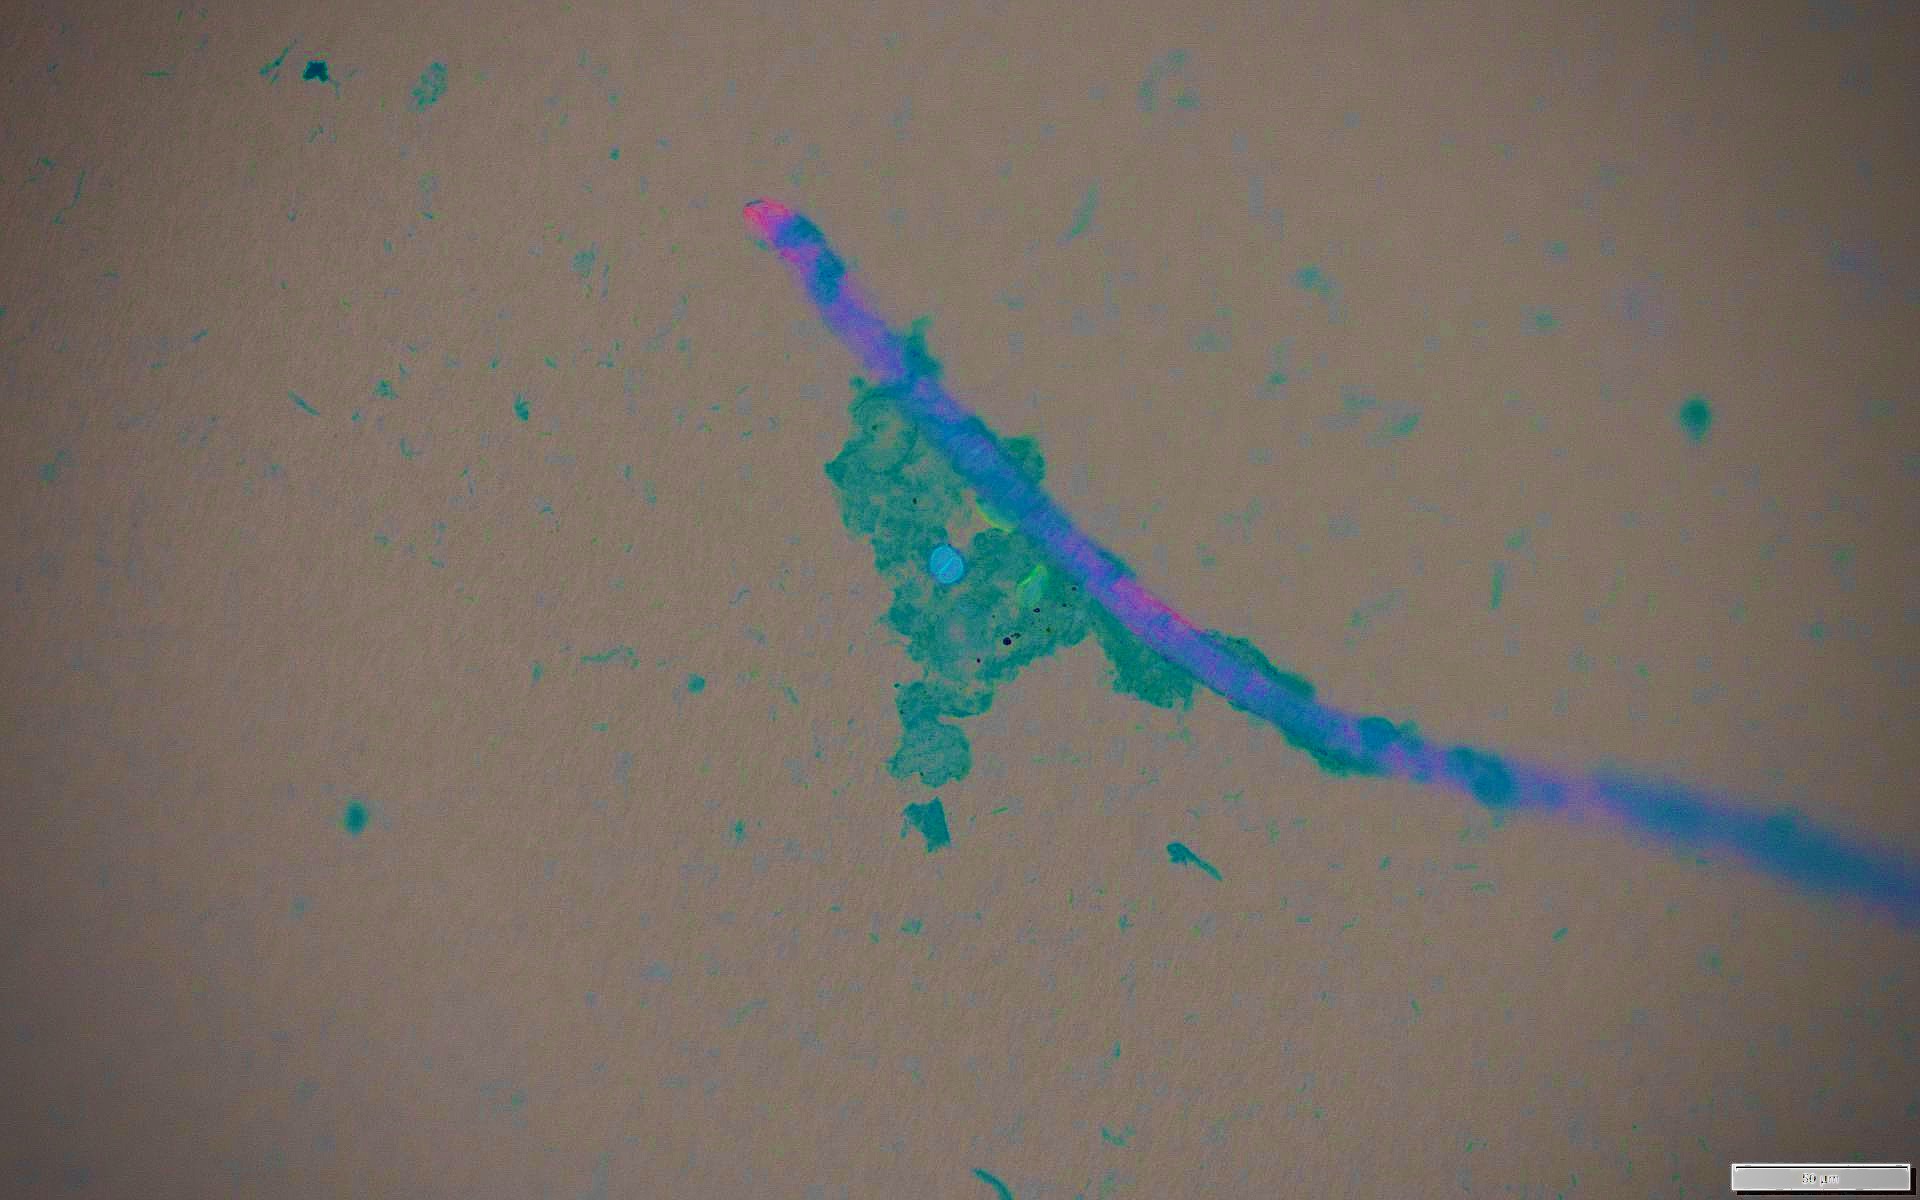 Microscopic view of blue microplastic fiber on beige background with greenish-blue dots showing pathogens 